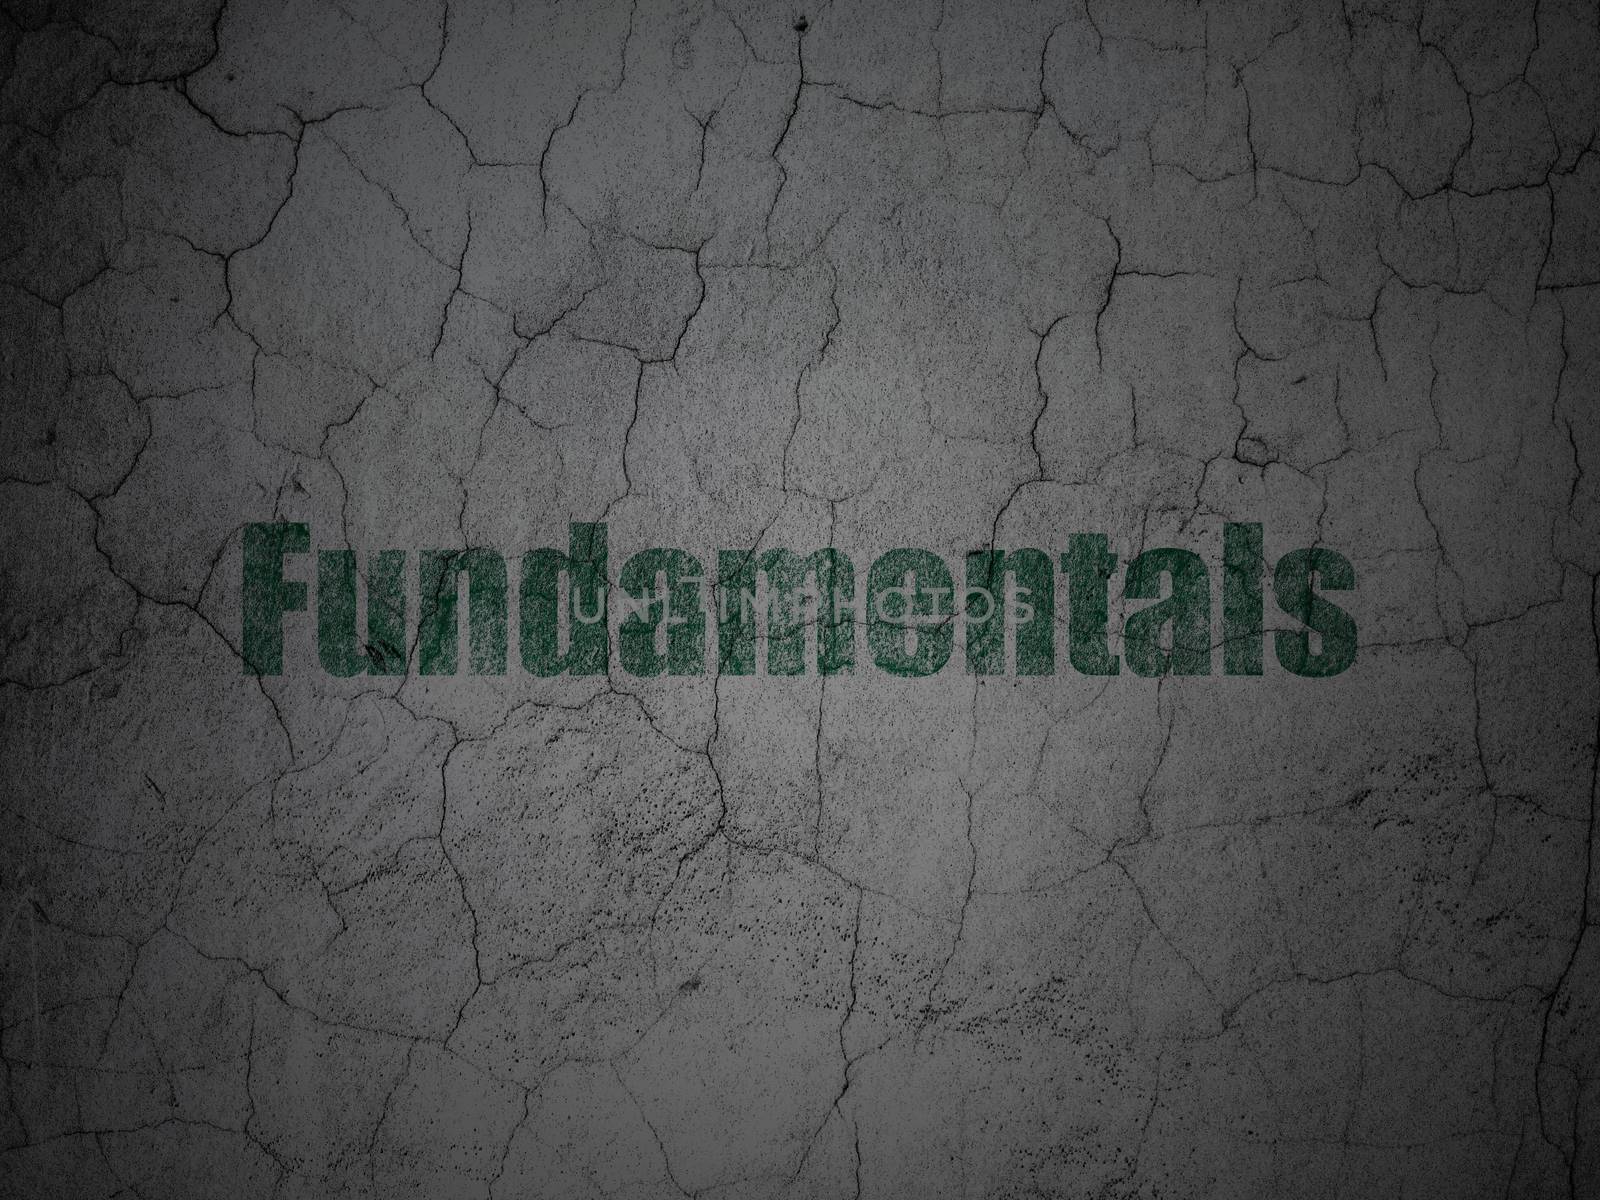 Science concept: Green Fundamentals on grunge textured concrete wall background